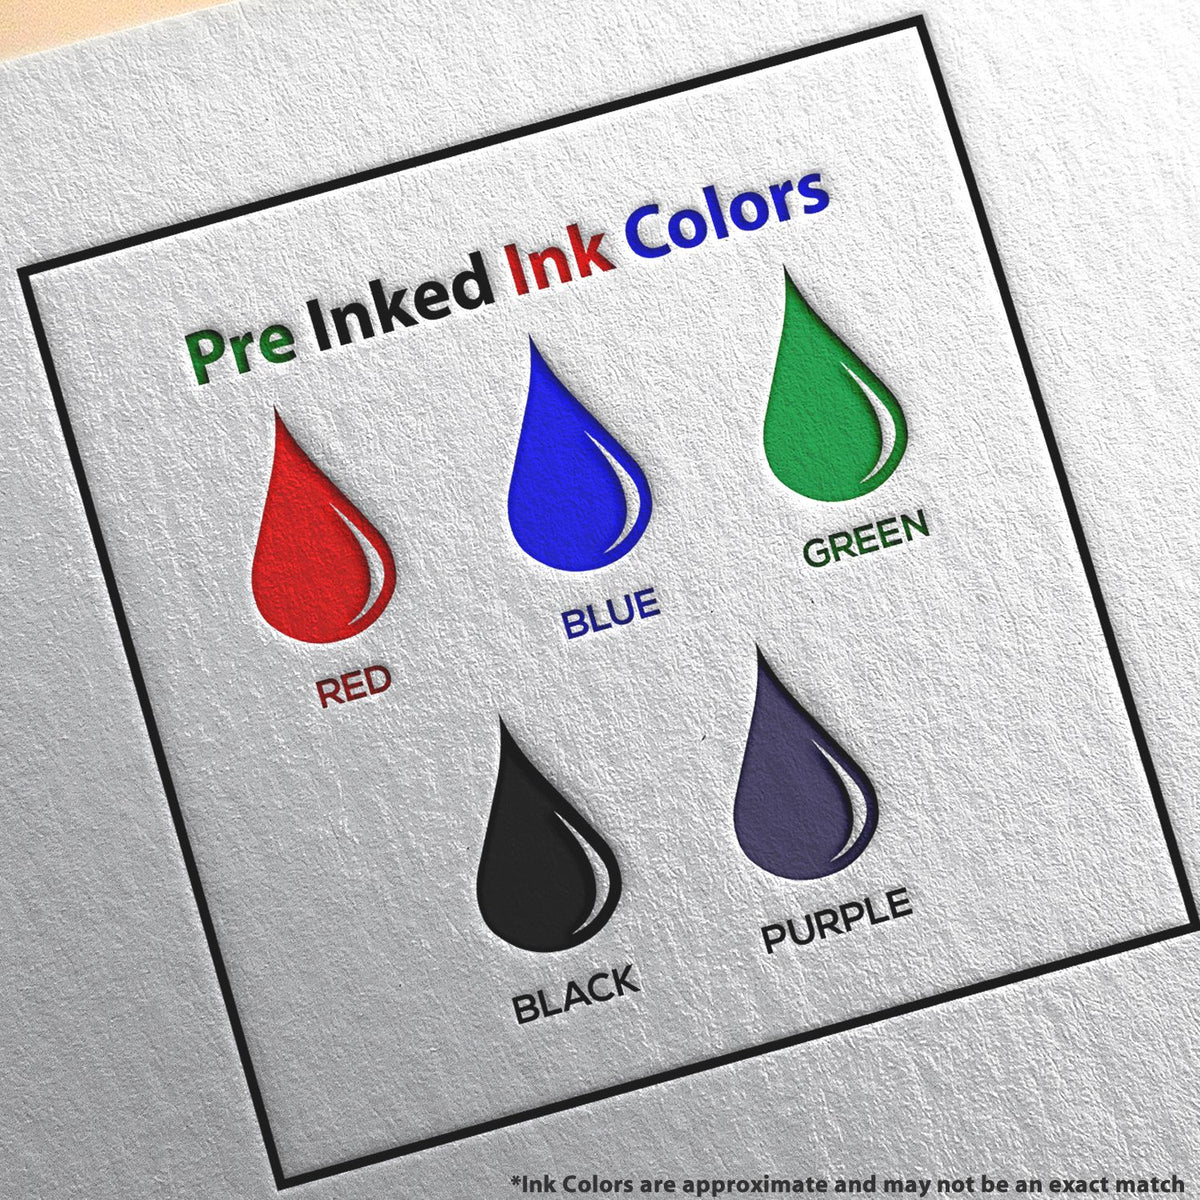 A picture showing the different ink colors or hues available for the Slim Pre-Inked Arkansas Landscape Architect Seal Stamp product.